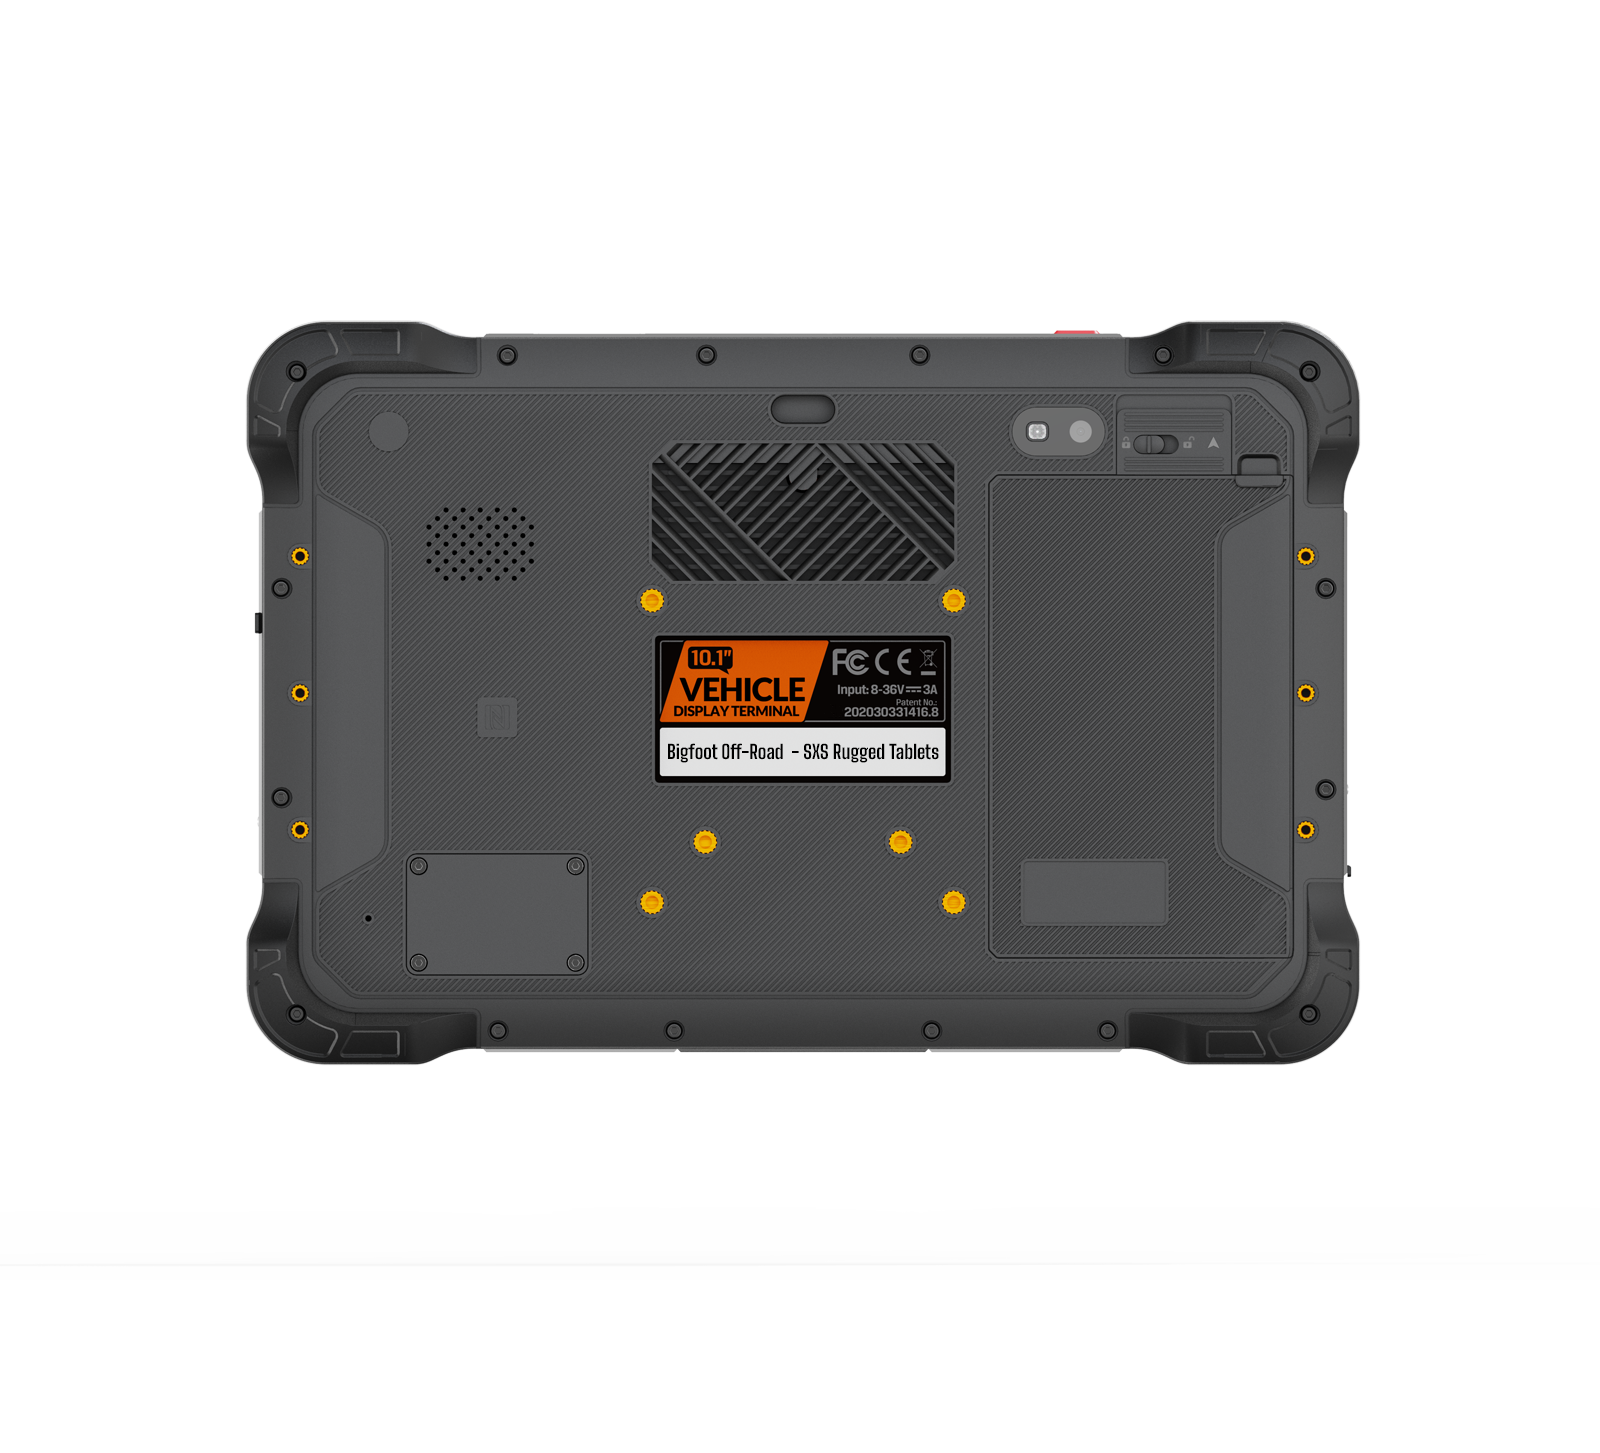 Sasquatch 10” Android Rugged Off-Road Vehicle Tablet - SXS Rugged Tablets